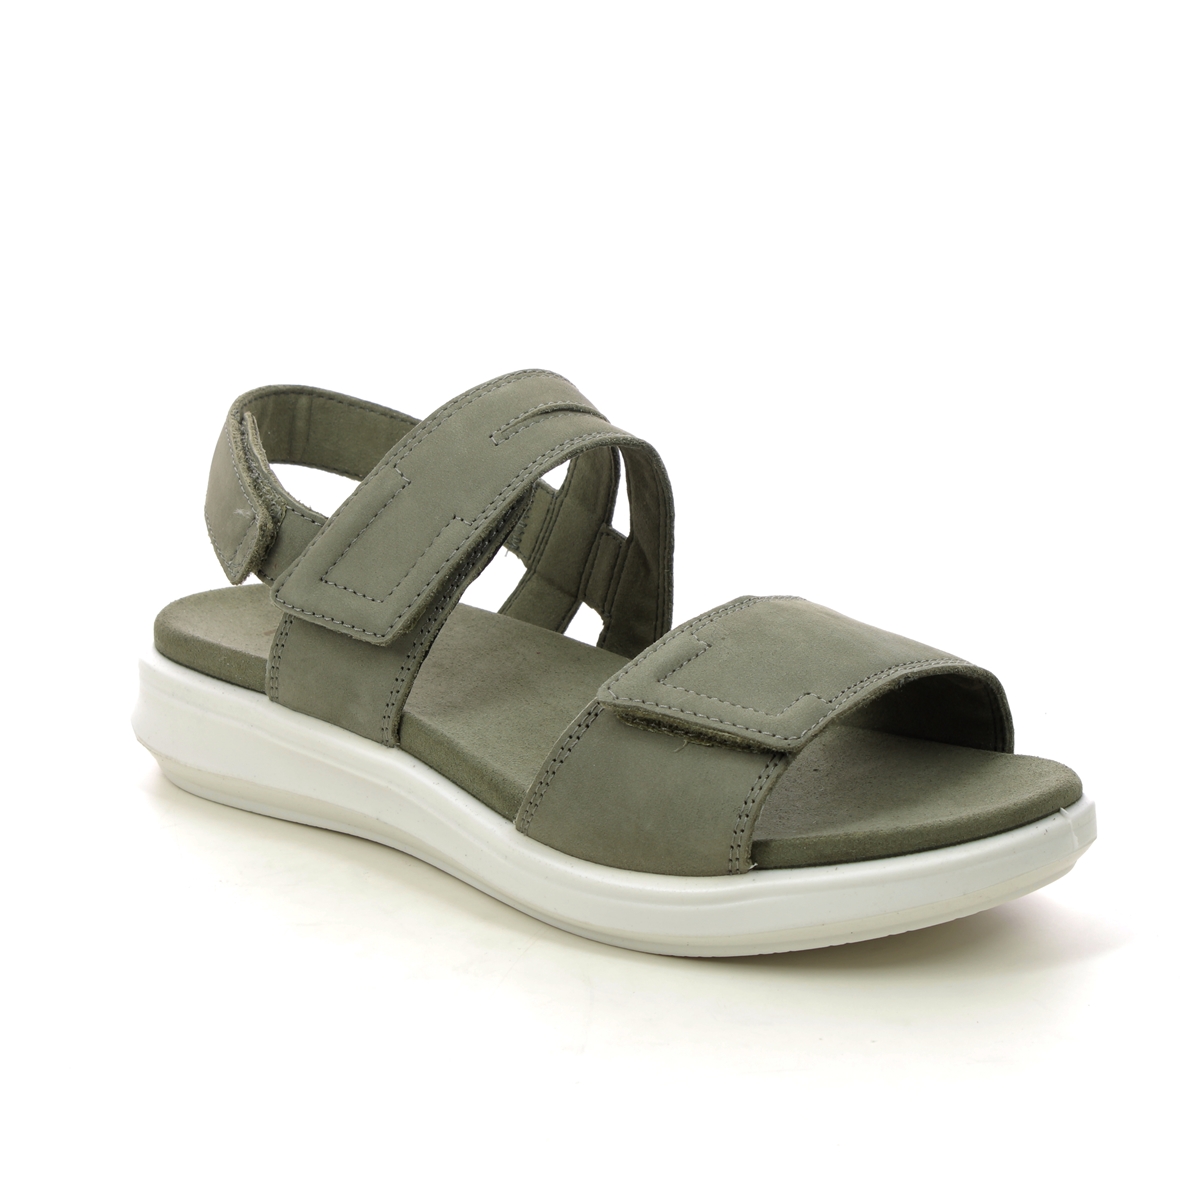 Legero Ella 3v Sage green Womens Comfortable Sandals 2000311-7520 in a Plain Leather in Size 41